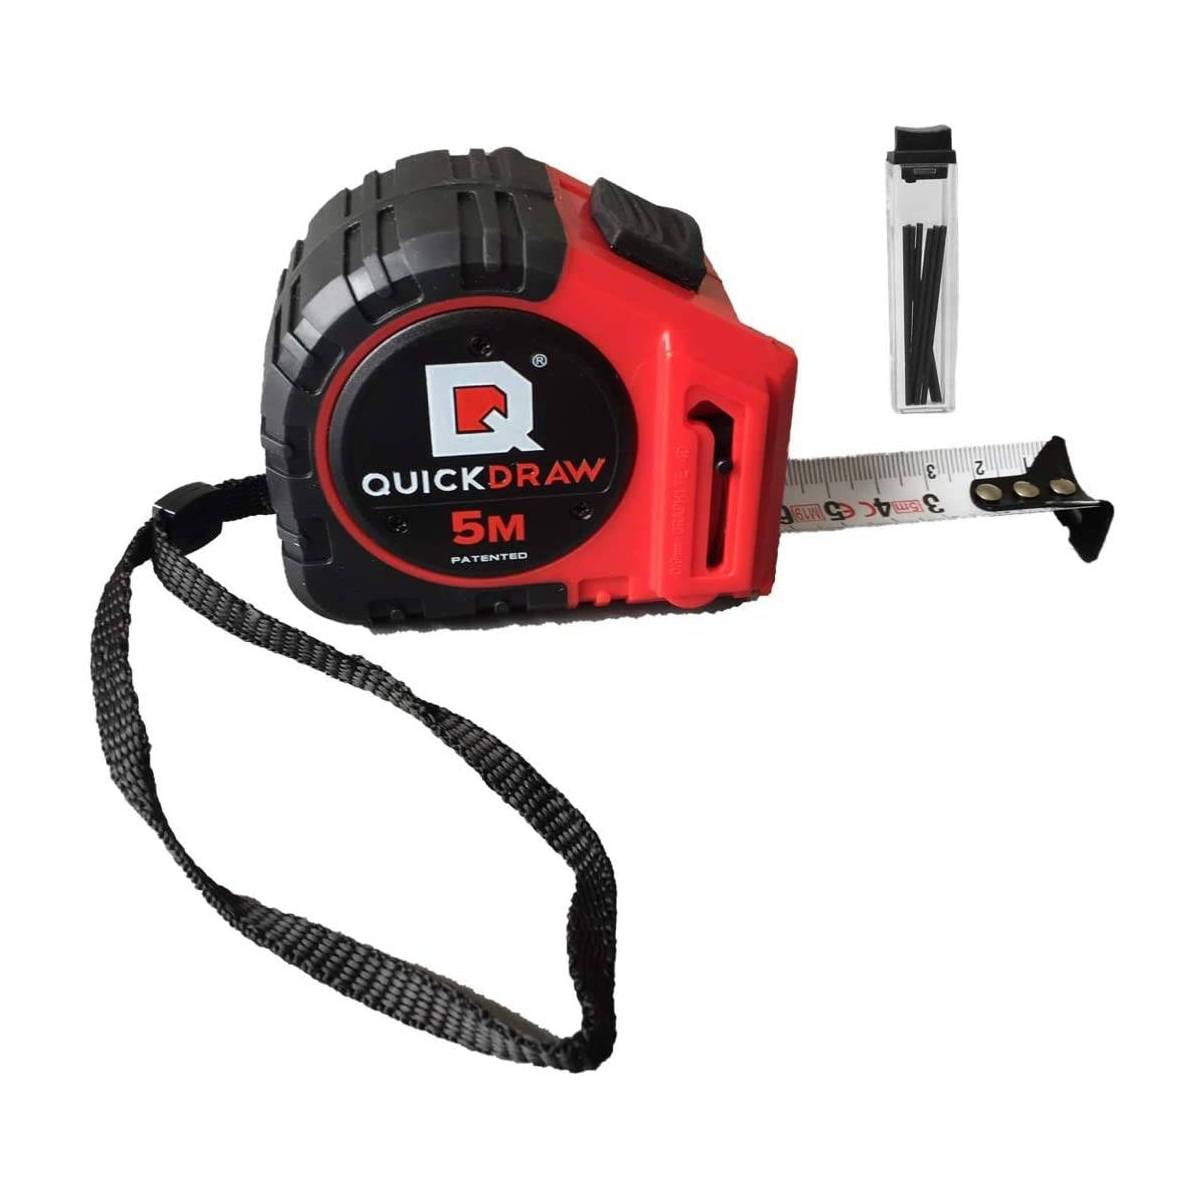 https://www.maxxidiscount.com/27221-large_default/5m-tape-measure-with-quickdraw-marking-function.jpg